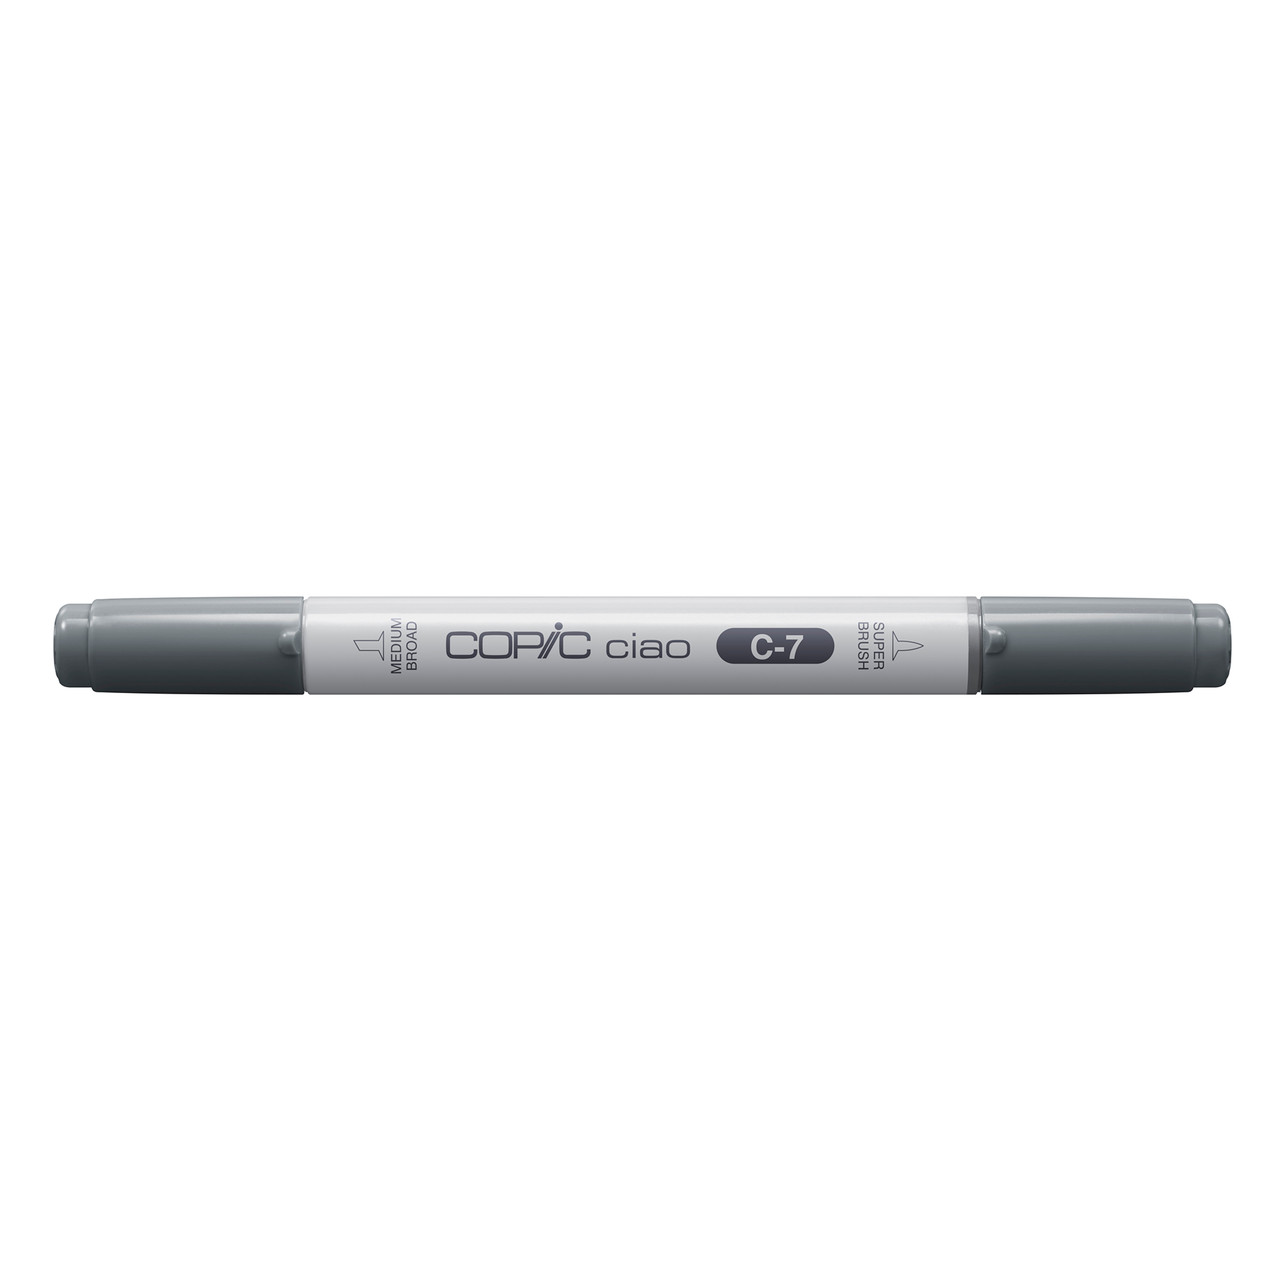 Copic Copic Ciao Marker Cool Gray No. 7 C-7 (One Size, Cool Grey No. 7 C7)